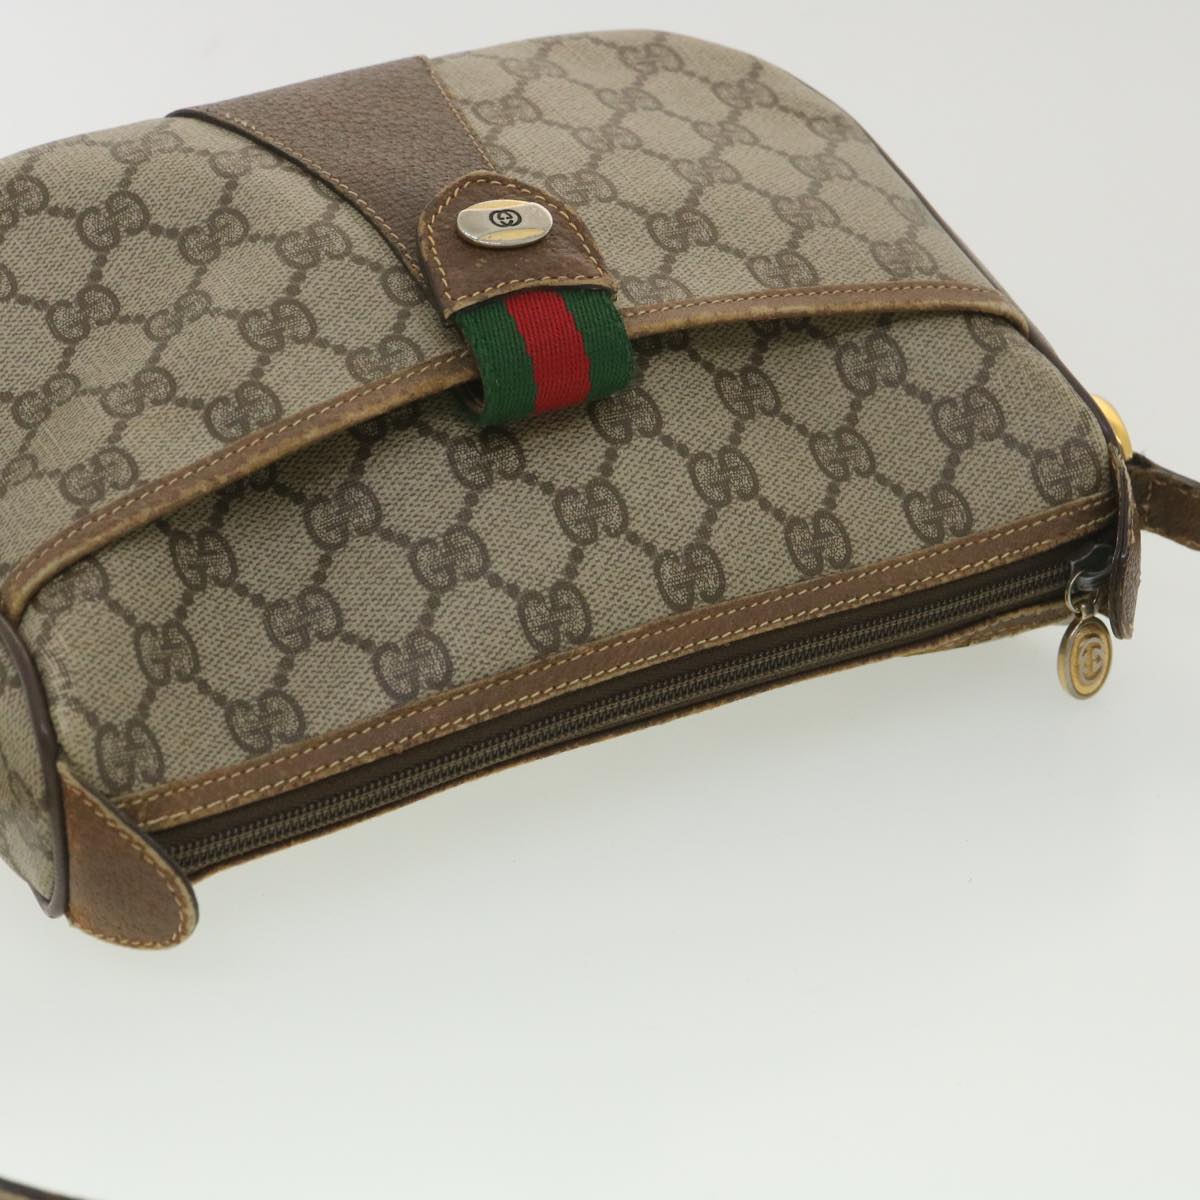 GUCCI GG Canvas Web Sherry Line Shoulder Bag Beige Red Green Auth 38014